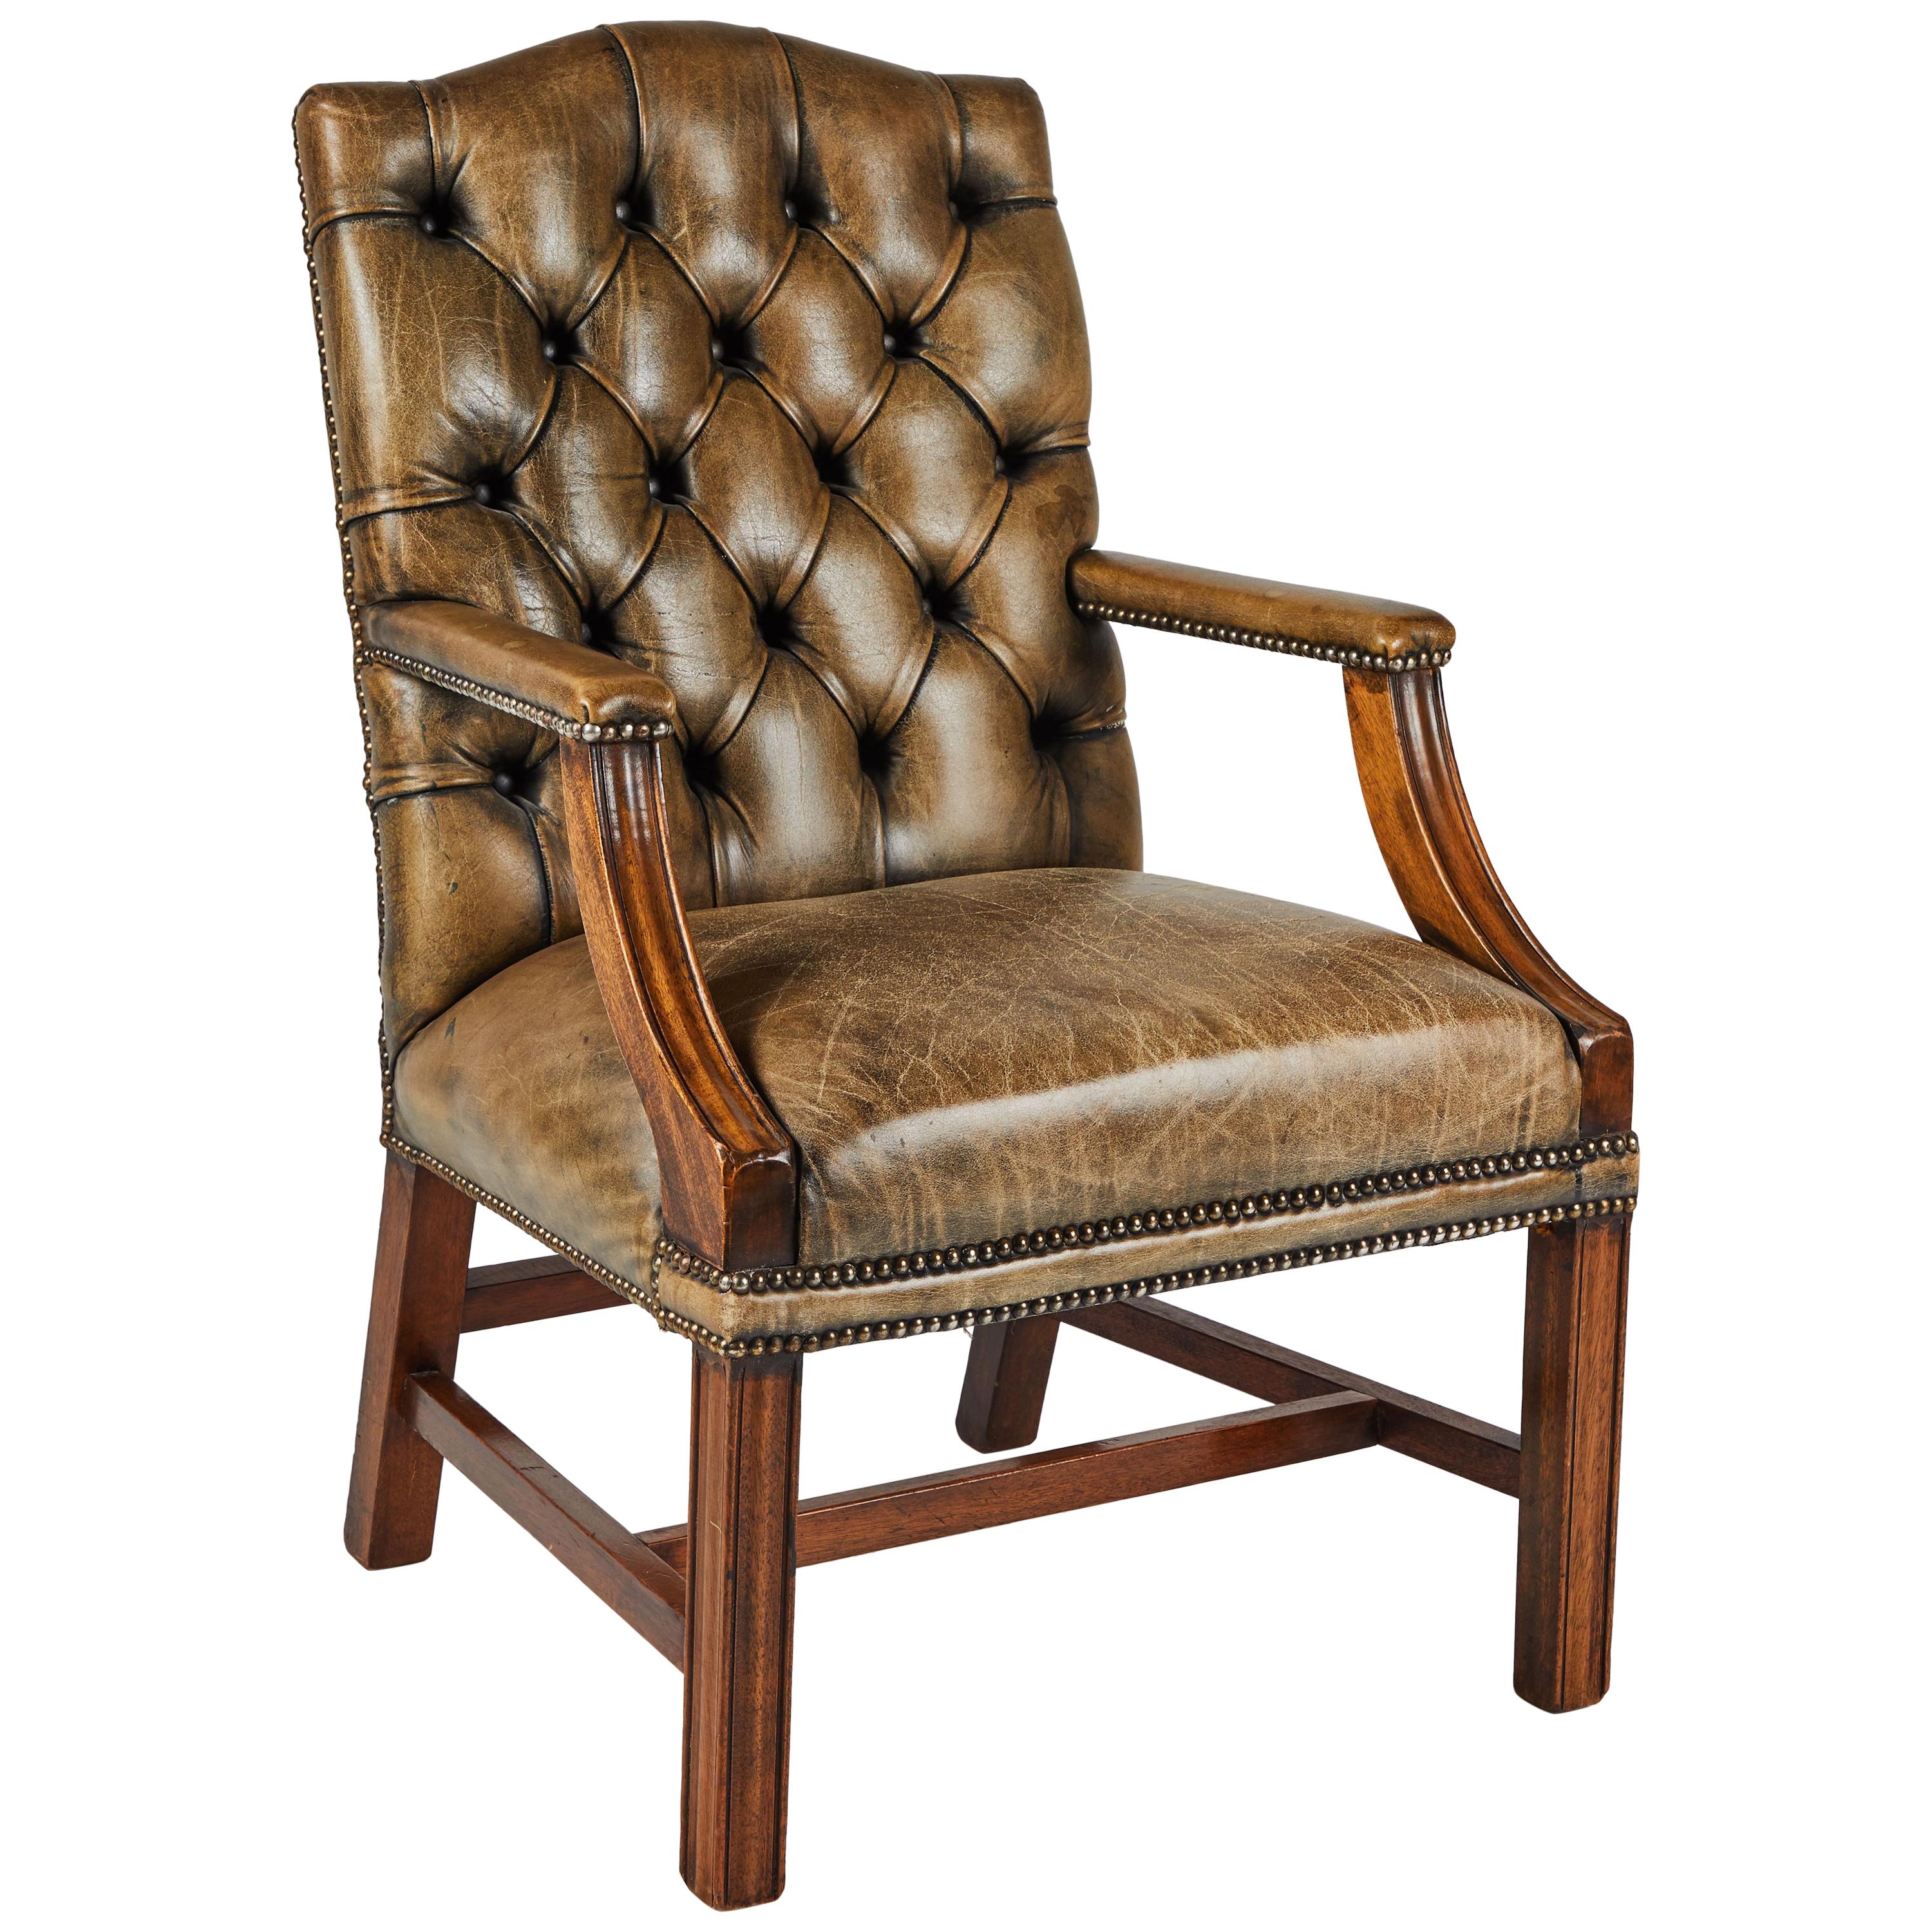 1860s Gainsborough Light Brown Original Leather Upholstered Tufted Armchair